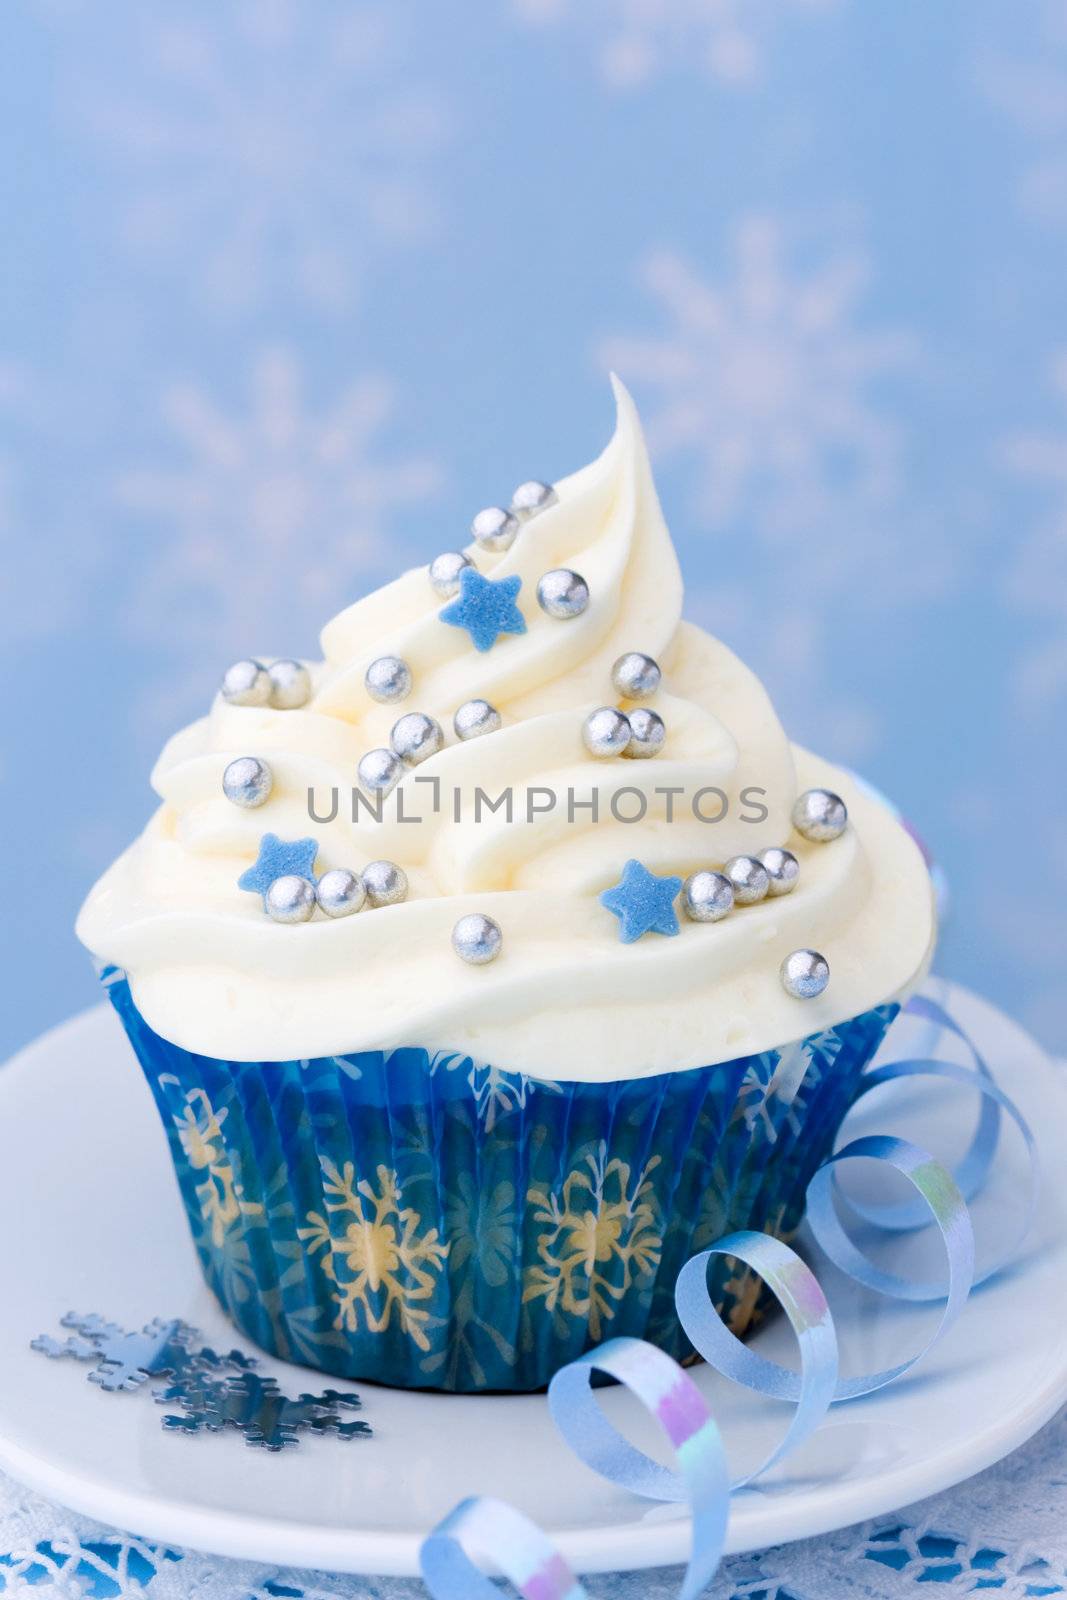 Cupcake with a winter theme against a snowflake background